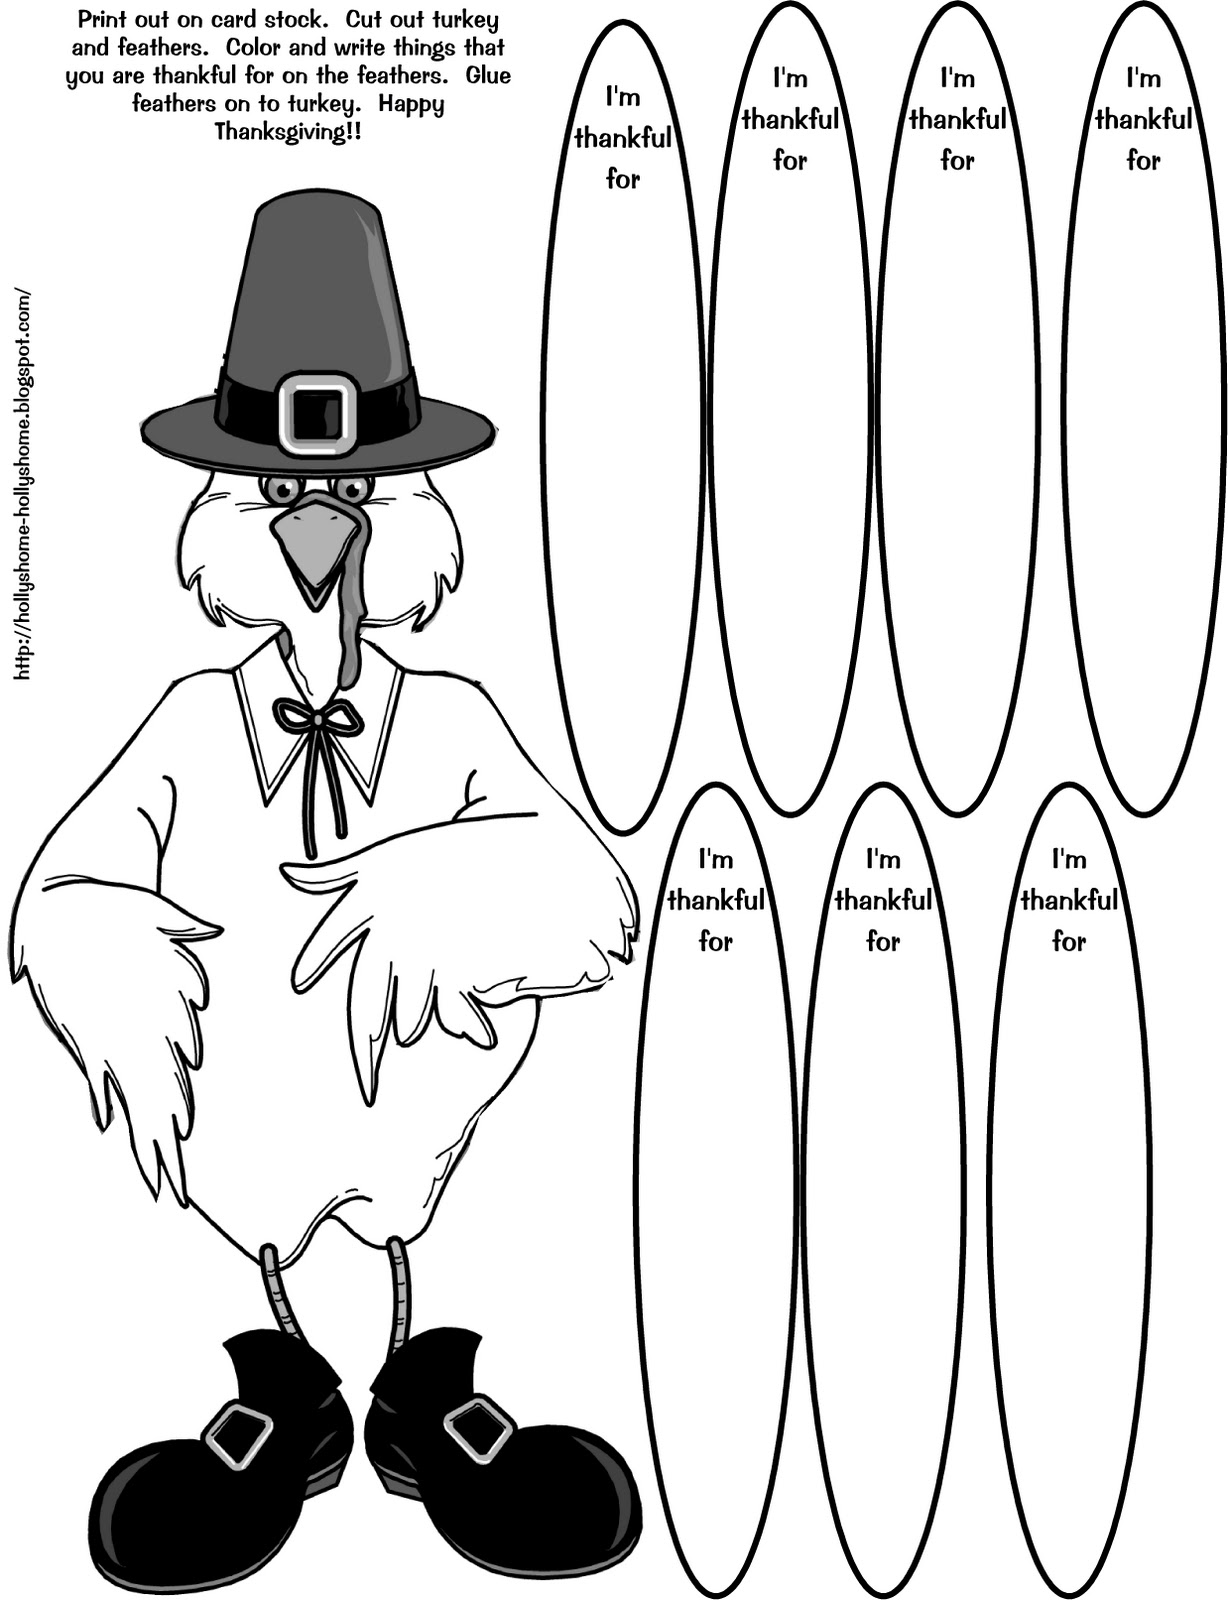 hollyshome-family-life-thankful-turkey-coloring-craft